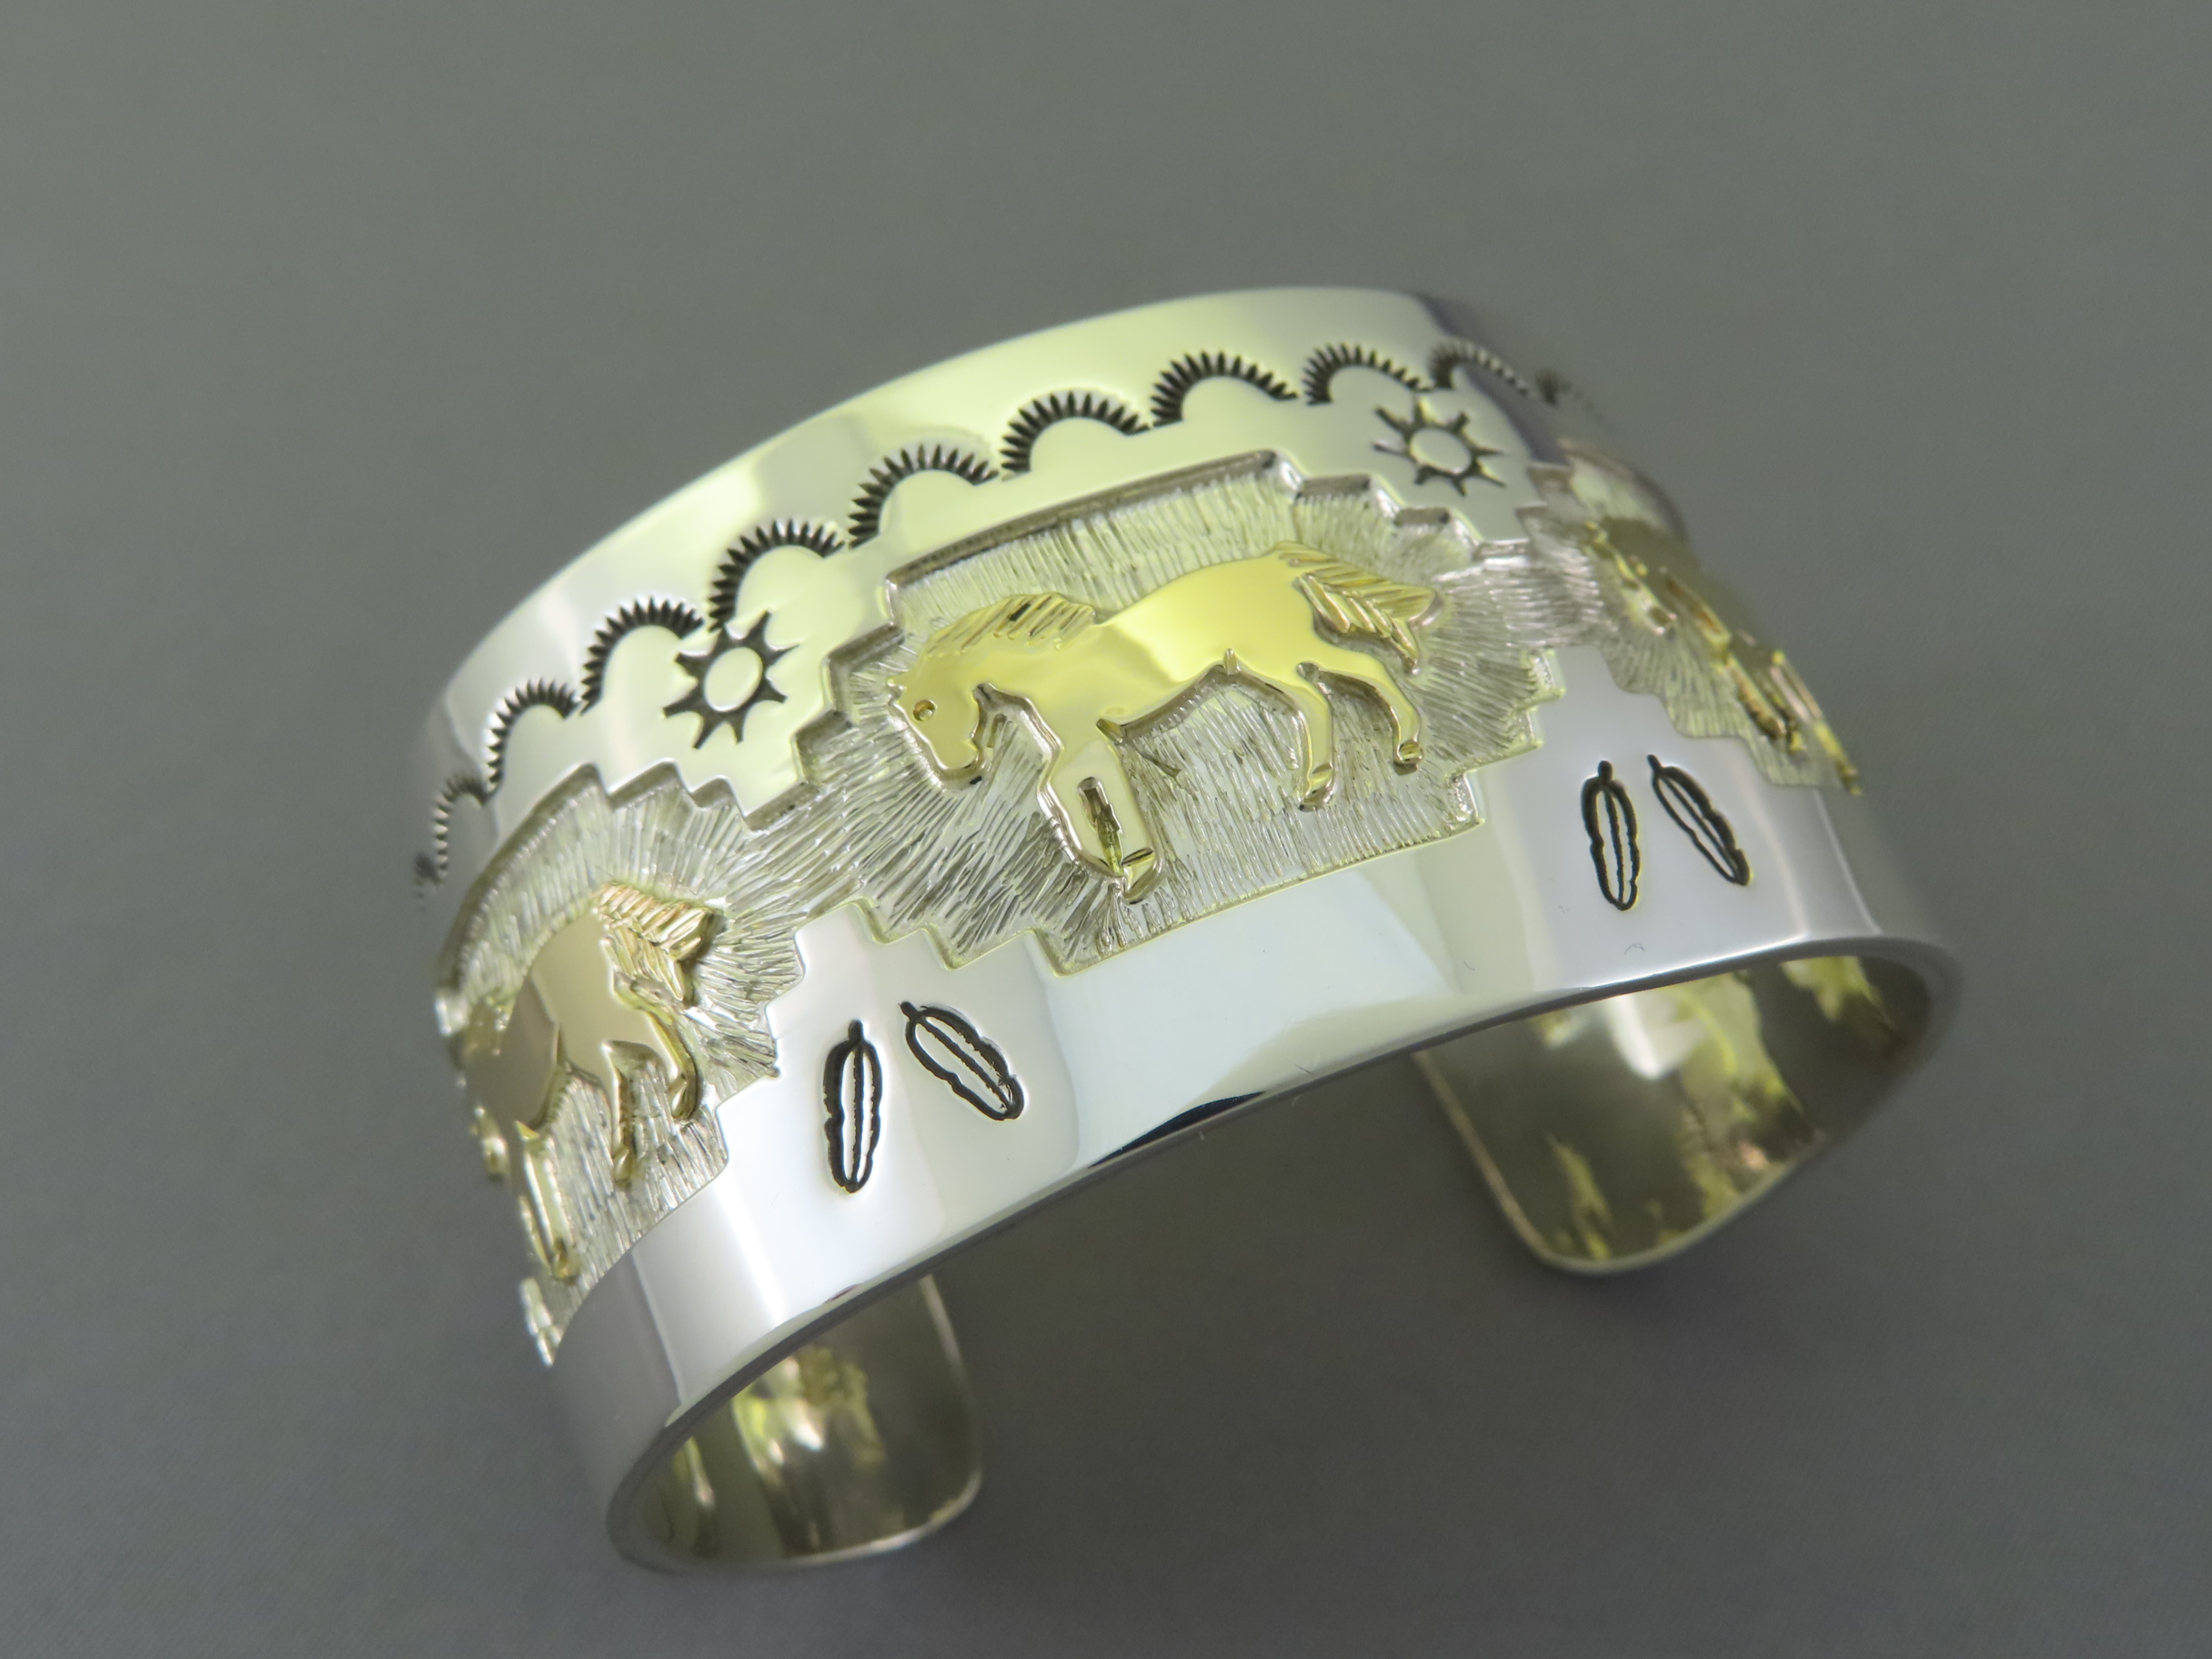 HORSE Bracelet by Fortune Huntinghorse in Gold & Silver